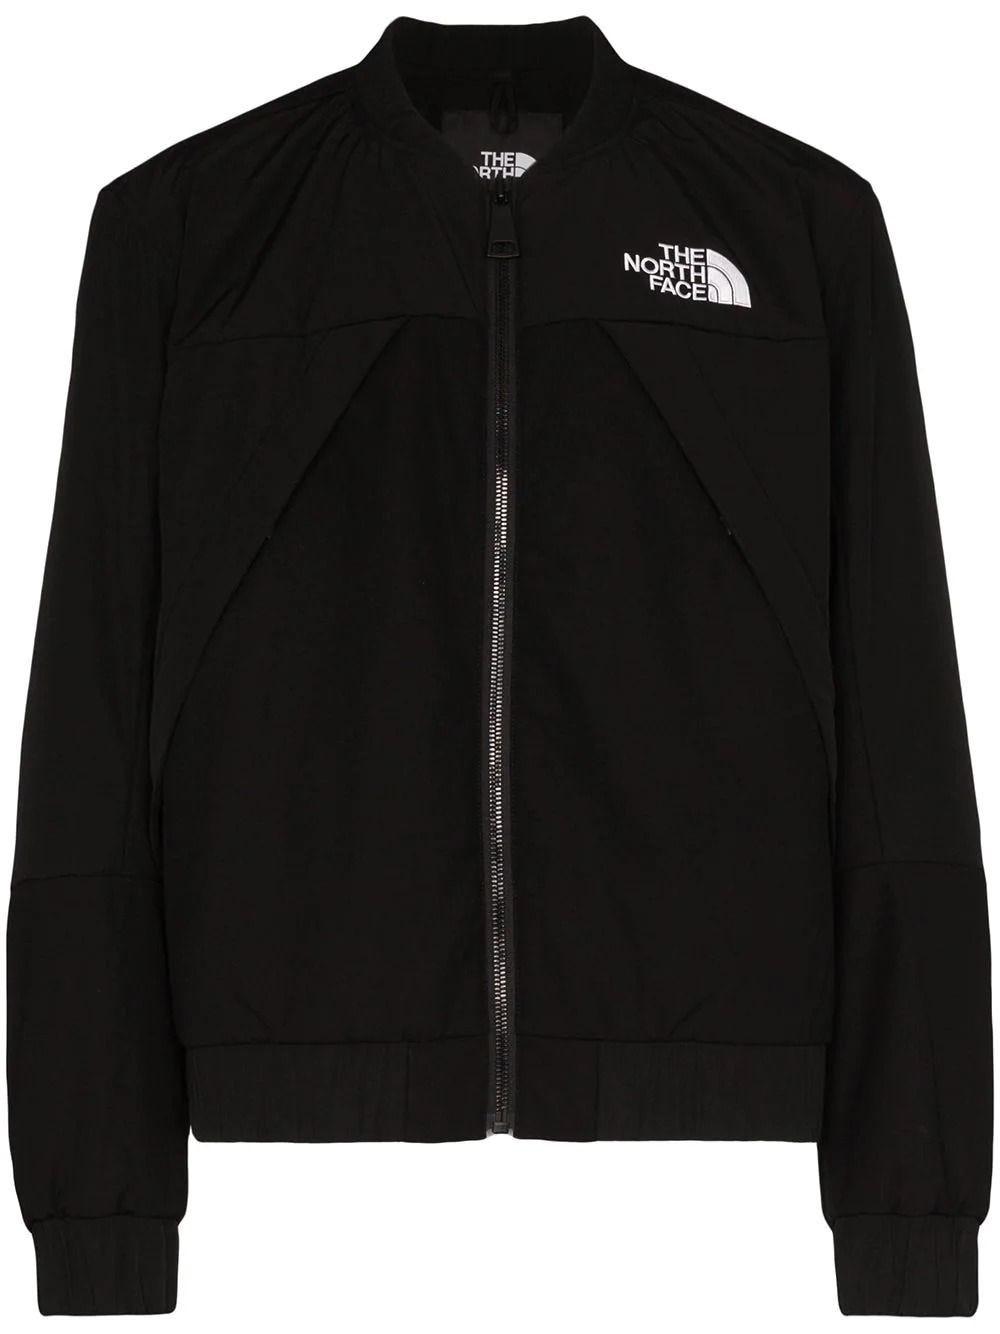 THE NORTH FACE BLACK SERIES Cotton Spectra Blouson Jacket in Black for Men  | Lyst